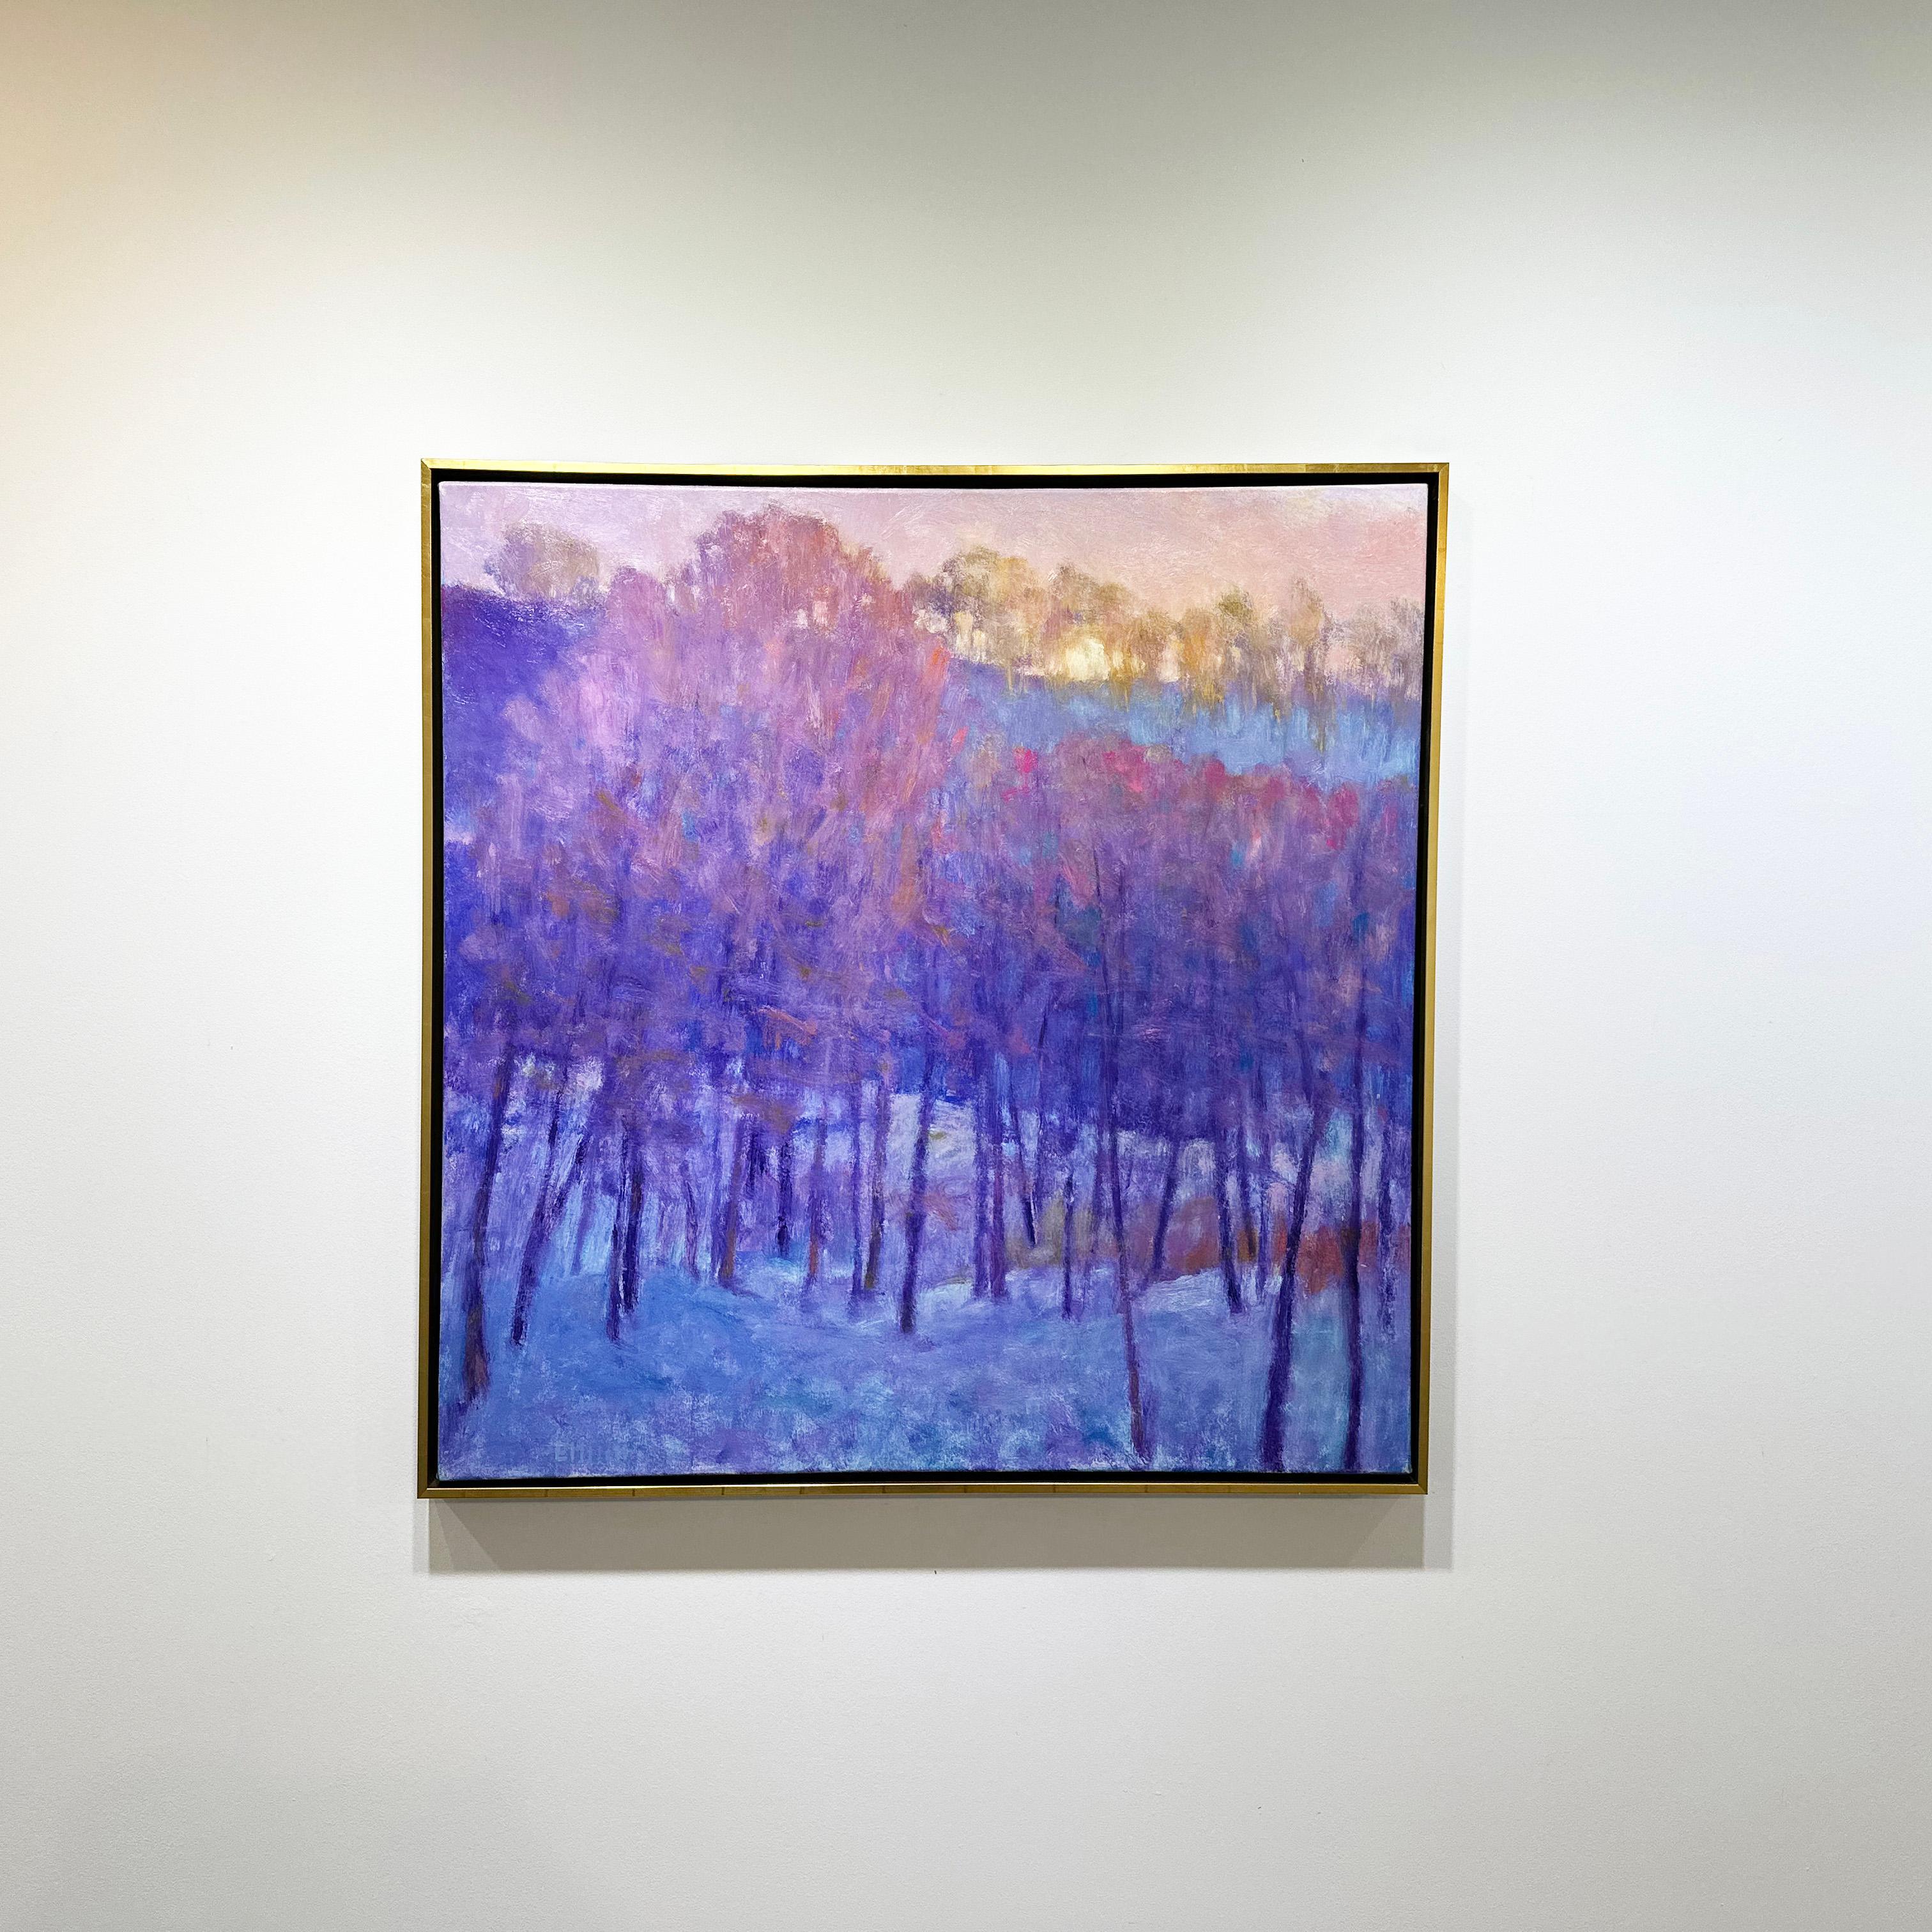 This abstract impressionistic landscape painting by Ken Elliott depicts a forest of trees sitting in a blanket of snow, and a subtle sunset above the top of the forest. The thin trees' trunks are a deep violet, which are contrasted by the muted